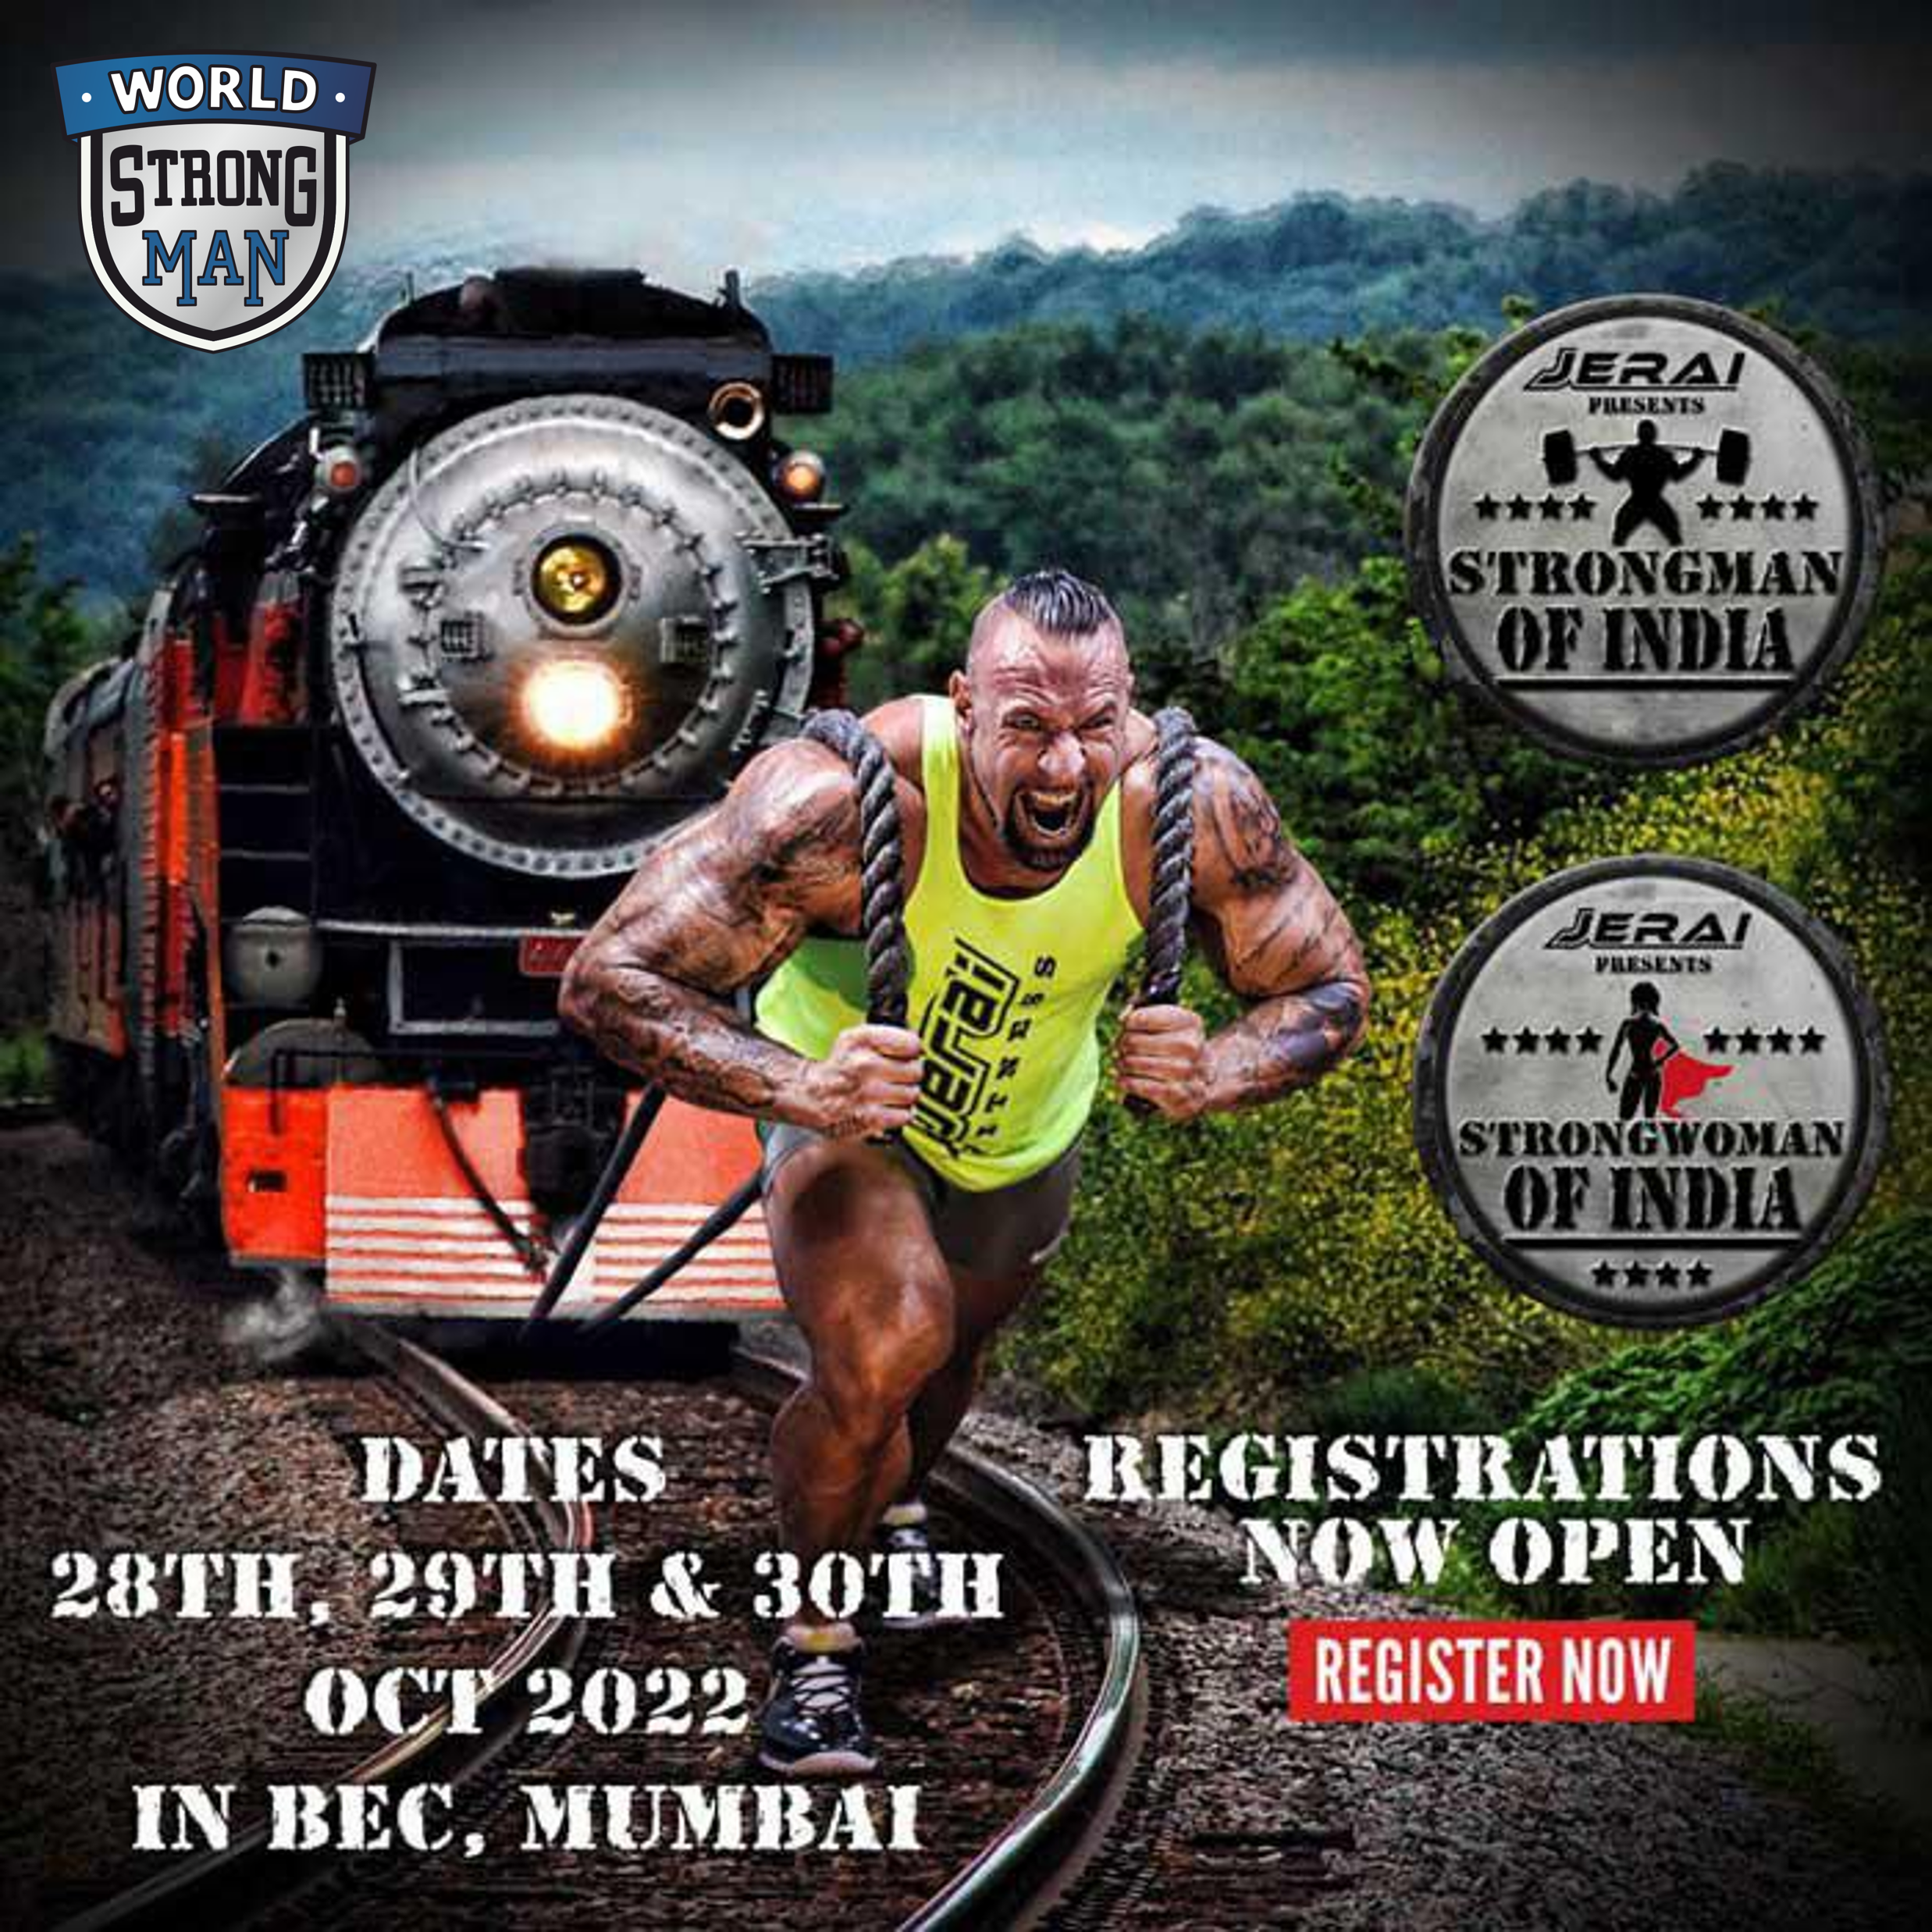 Strongman sport in india started after break again